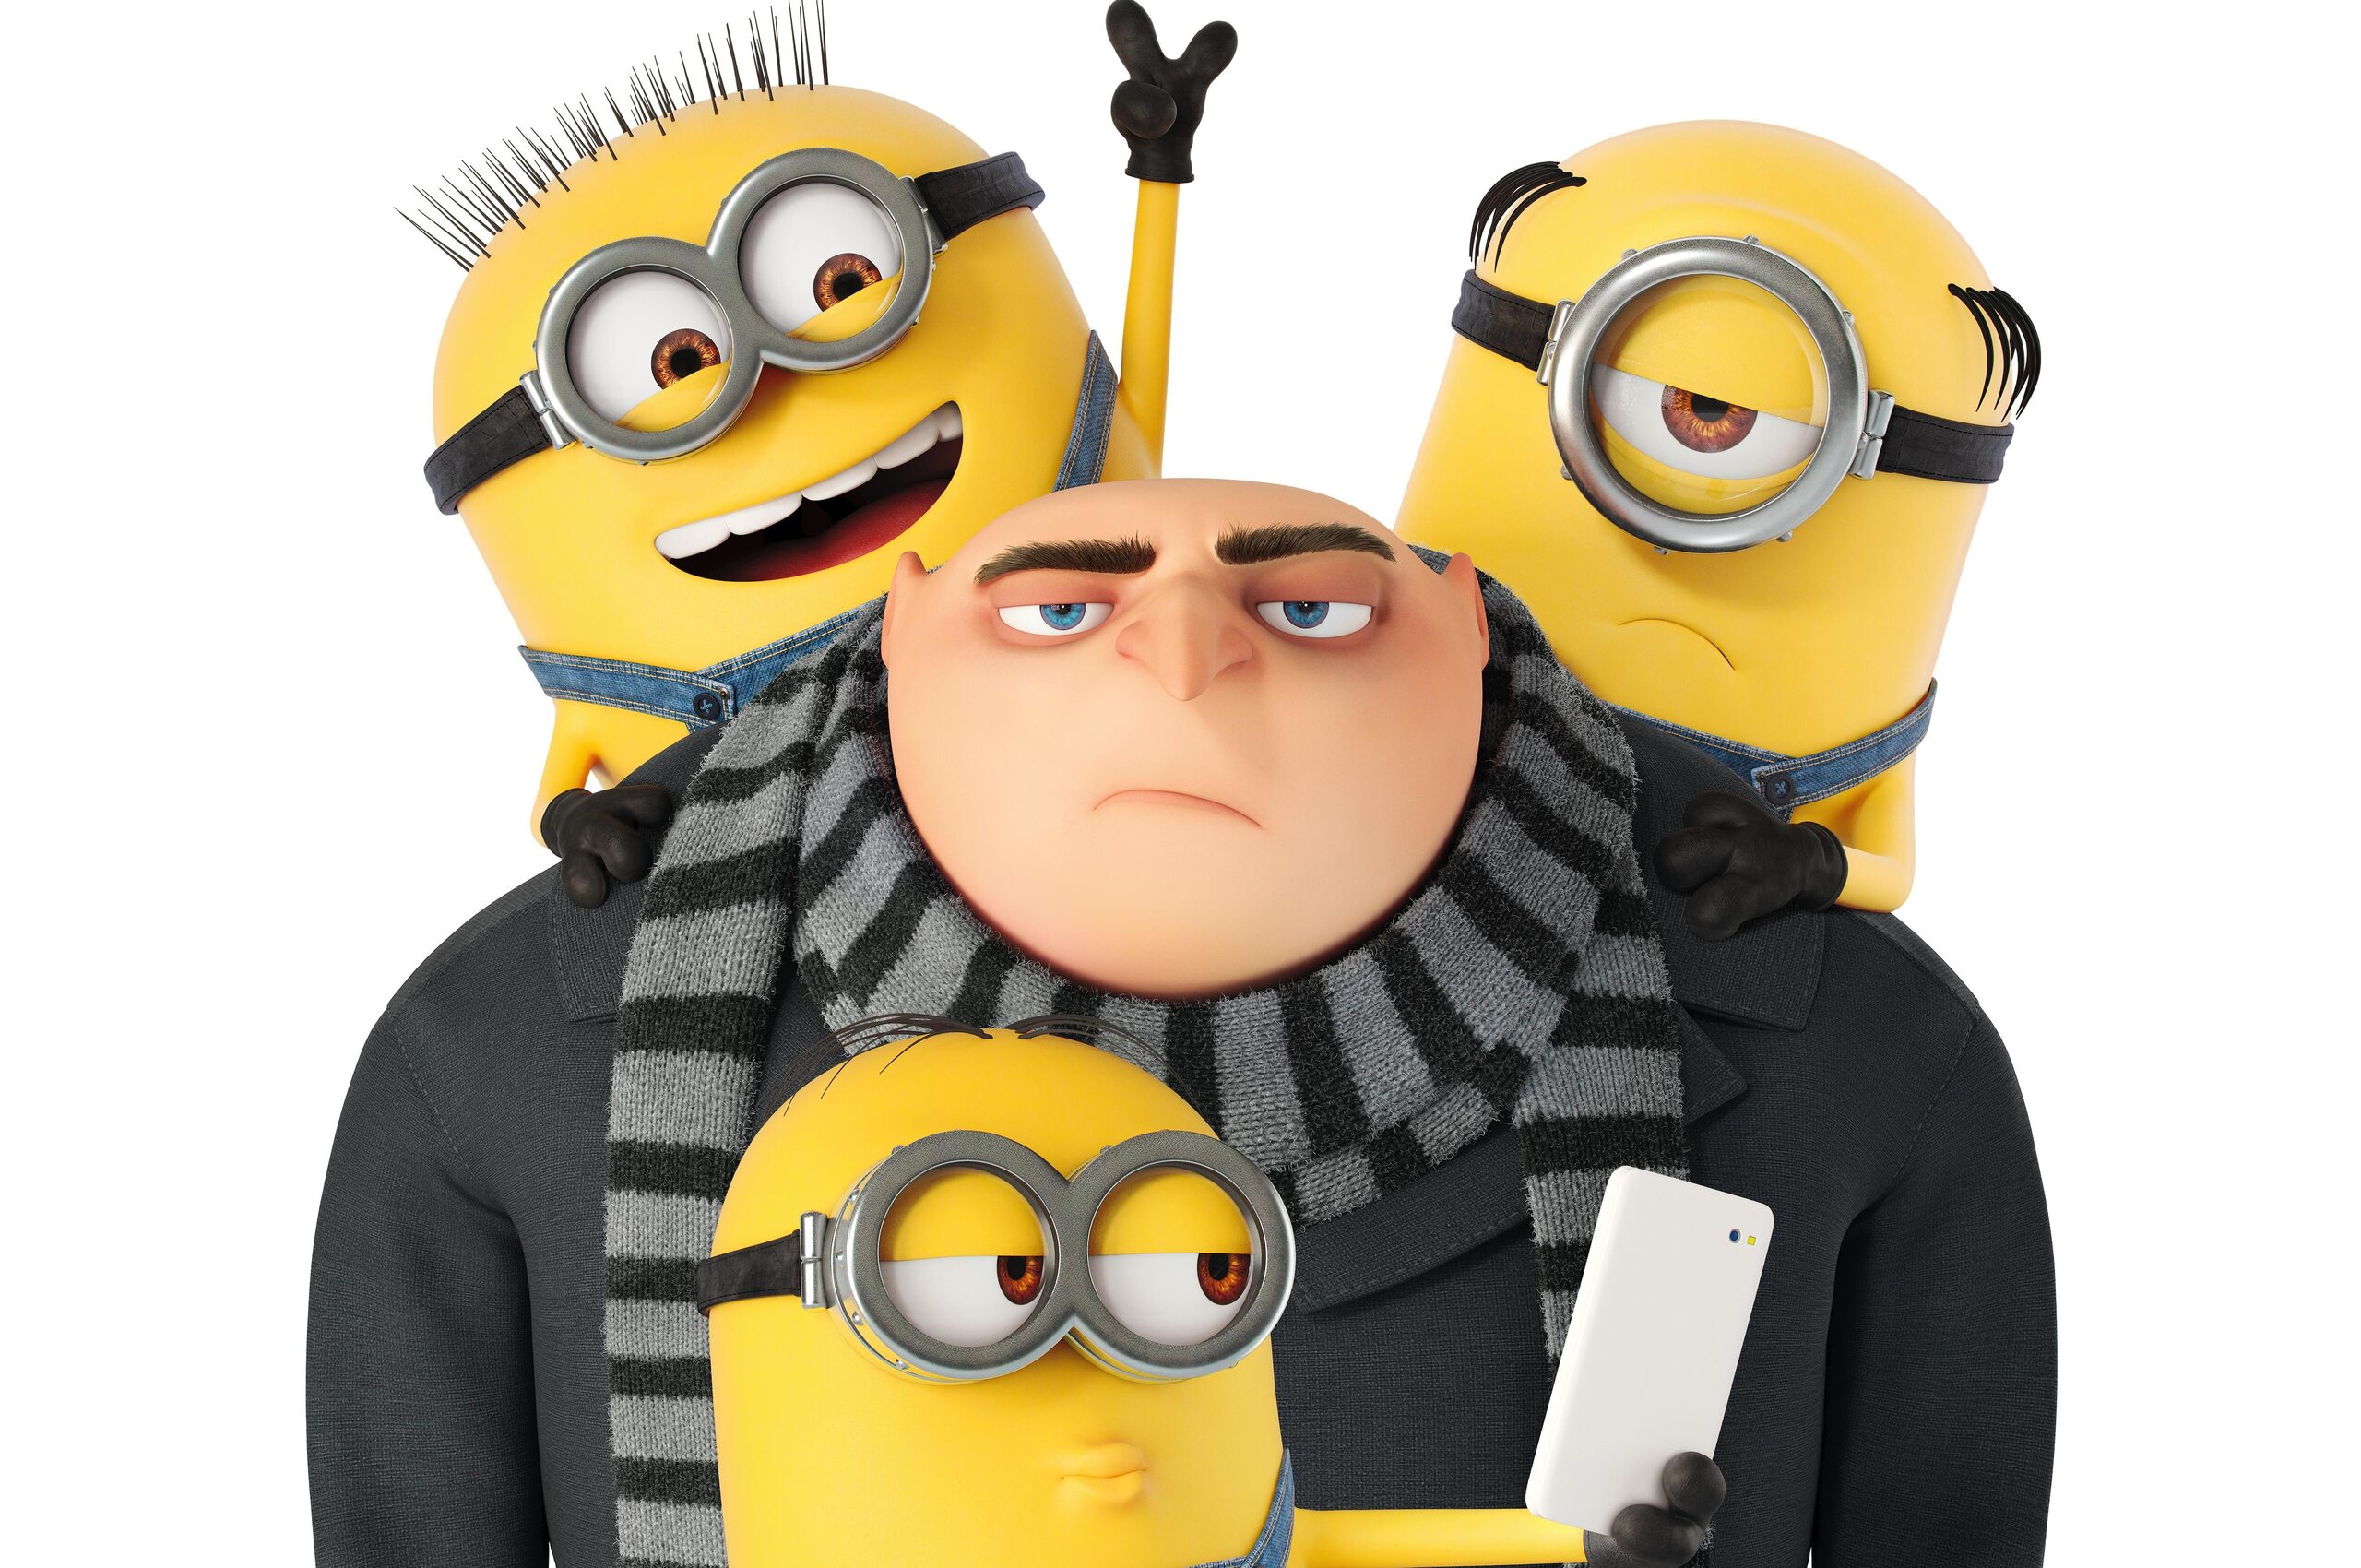 Despicable Me 3 10K Wallpapers